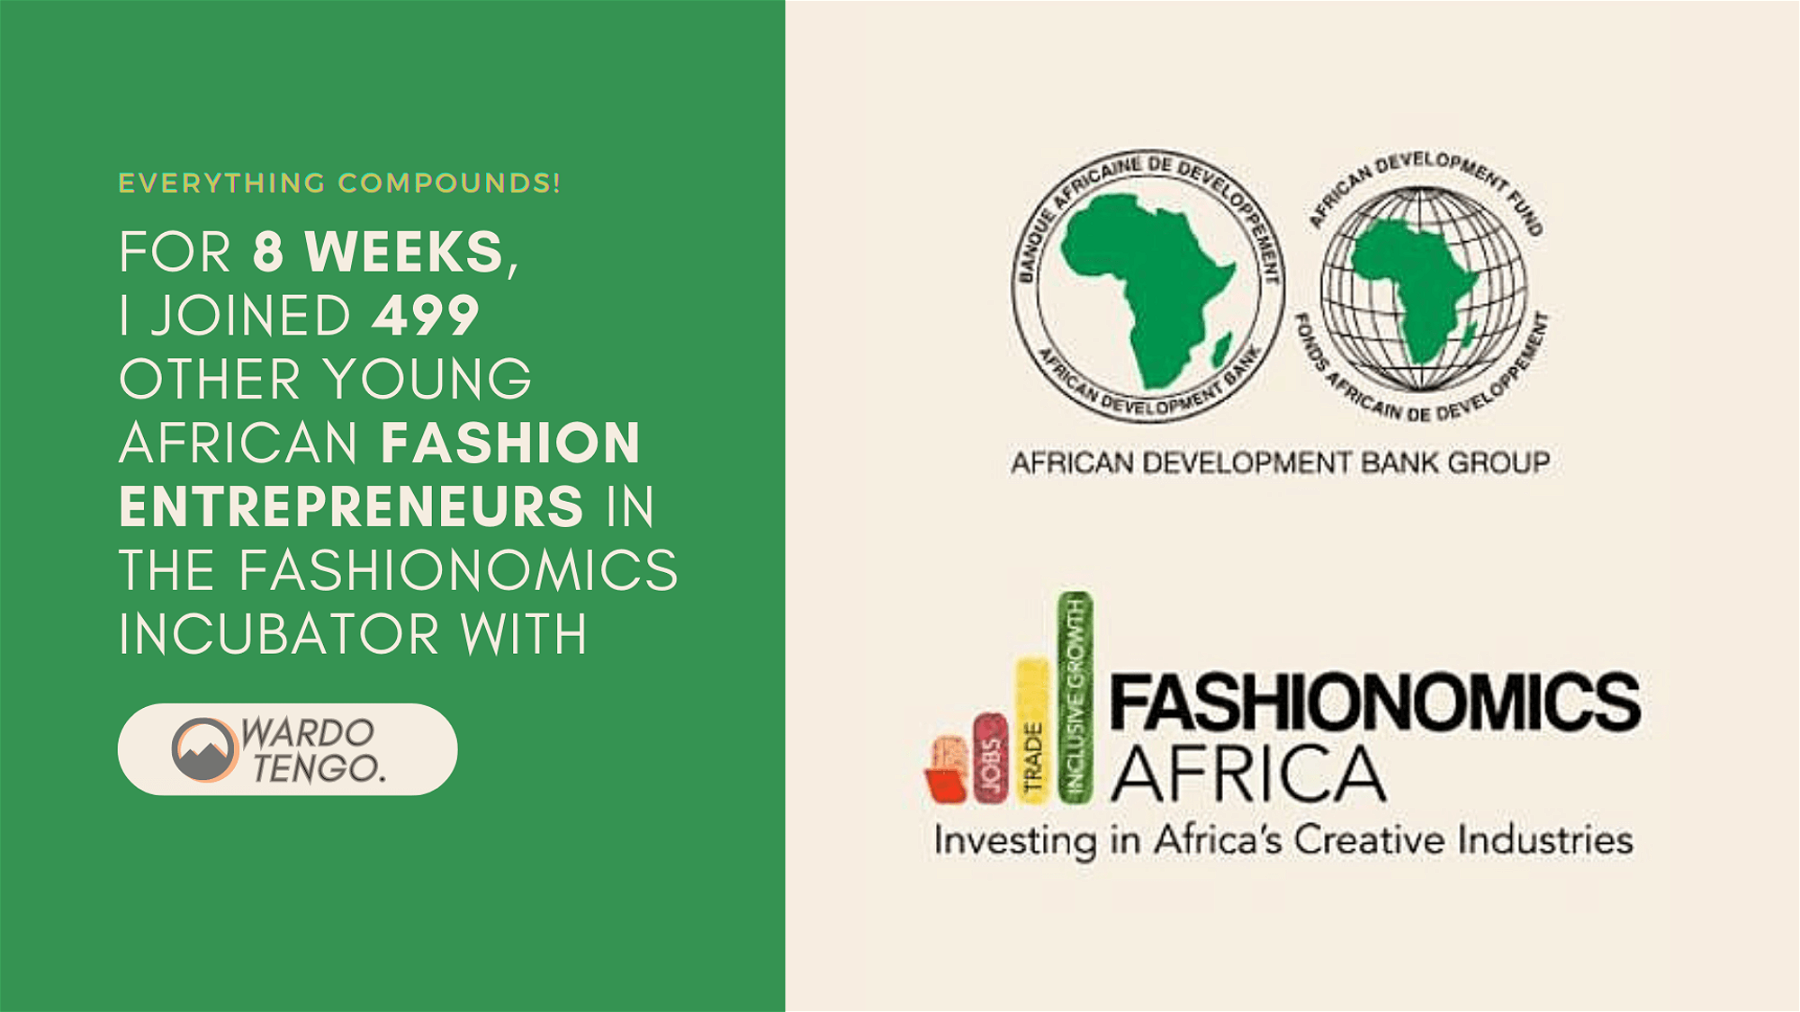 I participated in AfDB’s Inaugural Fashionomics Africa Incubator program for African Fashion creatives with WARDO TENGO. – here’s what I learned before placing out